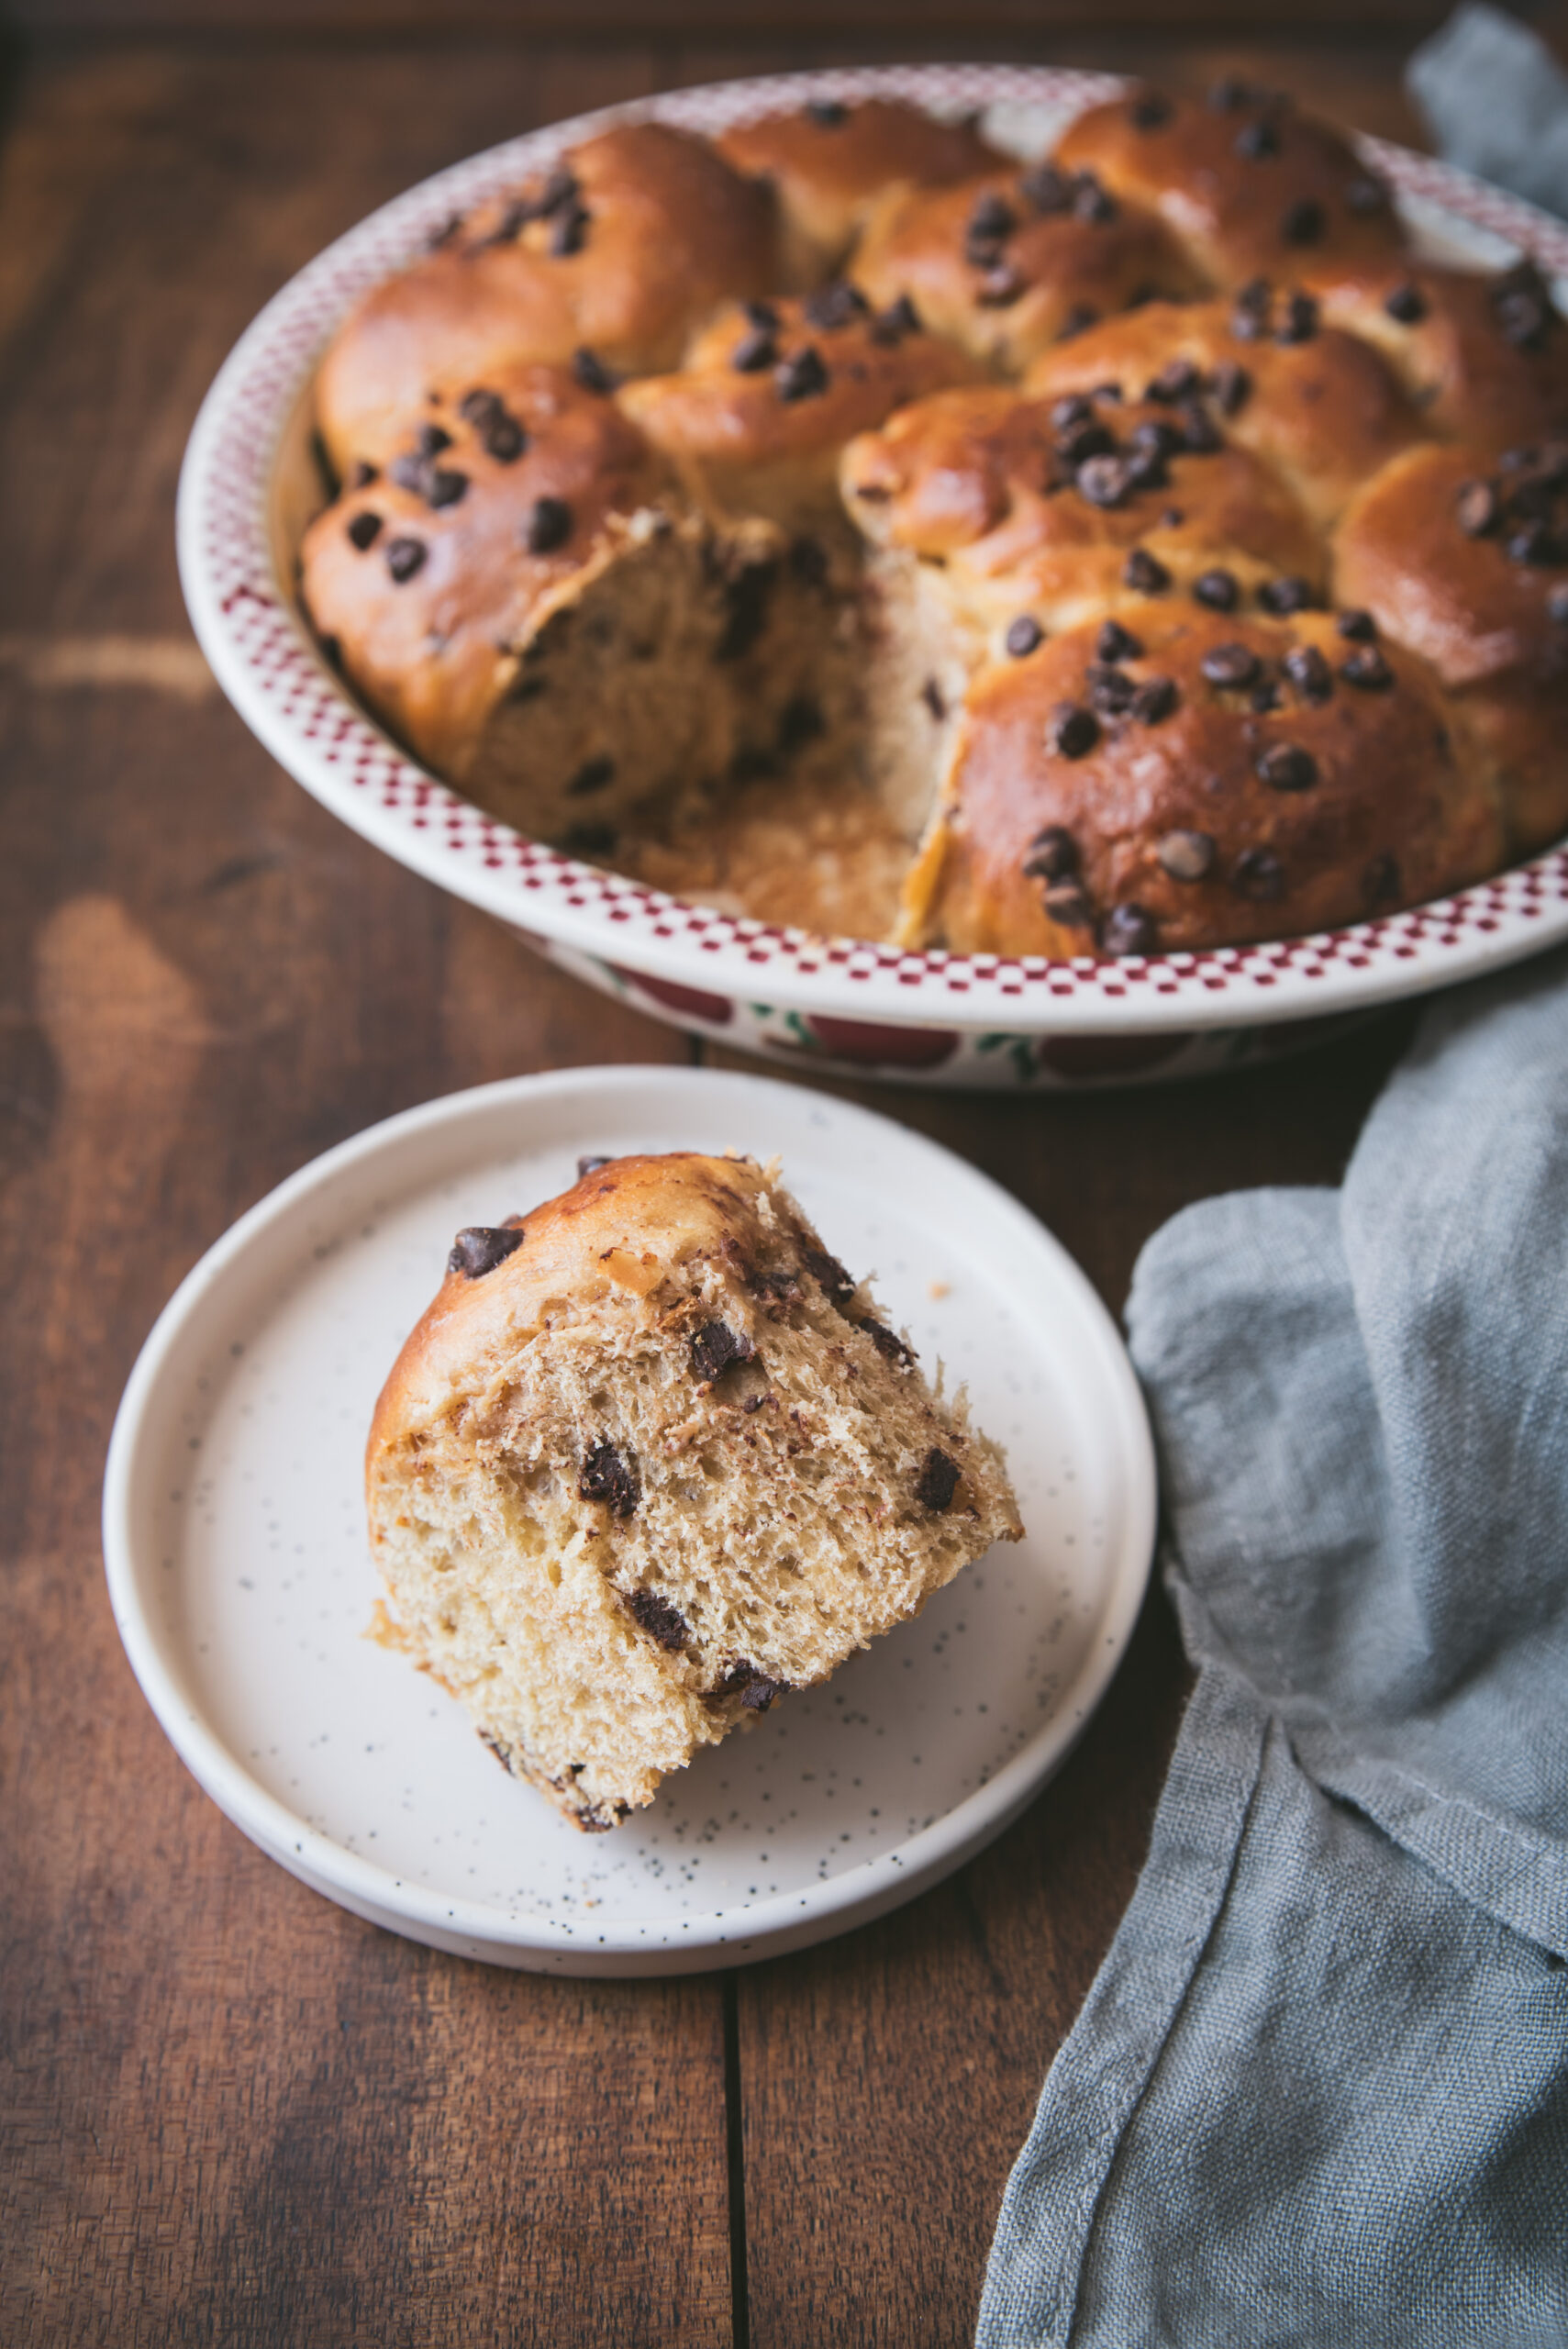 Butchy Brioche Recipe with Chocolate Chips